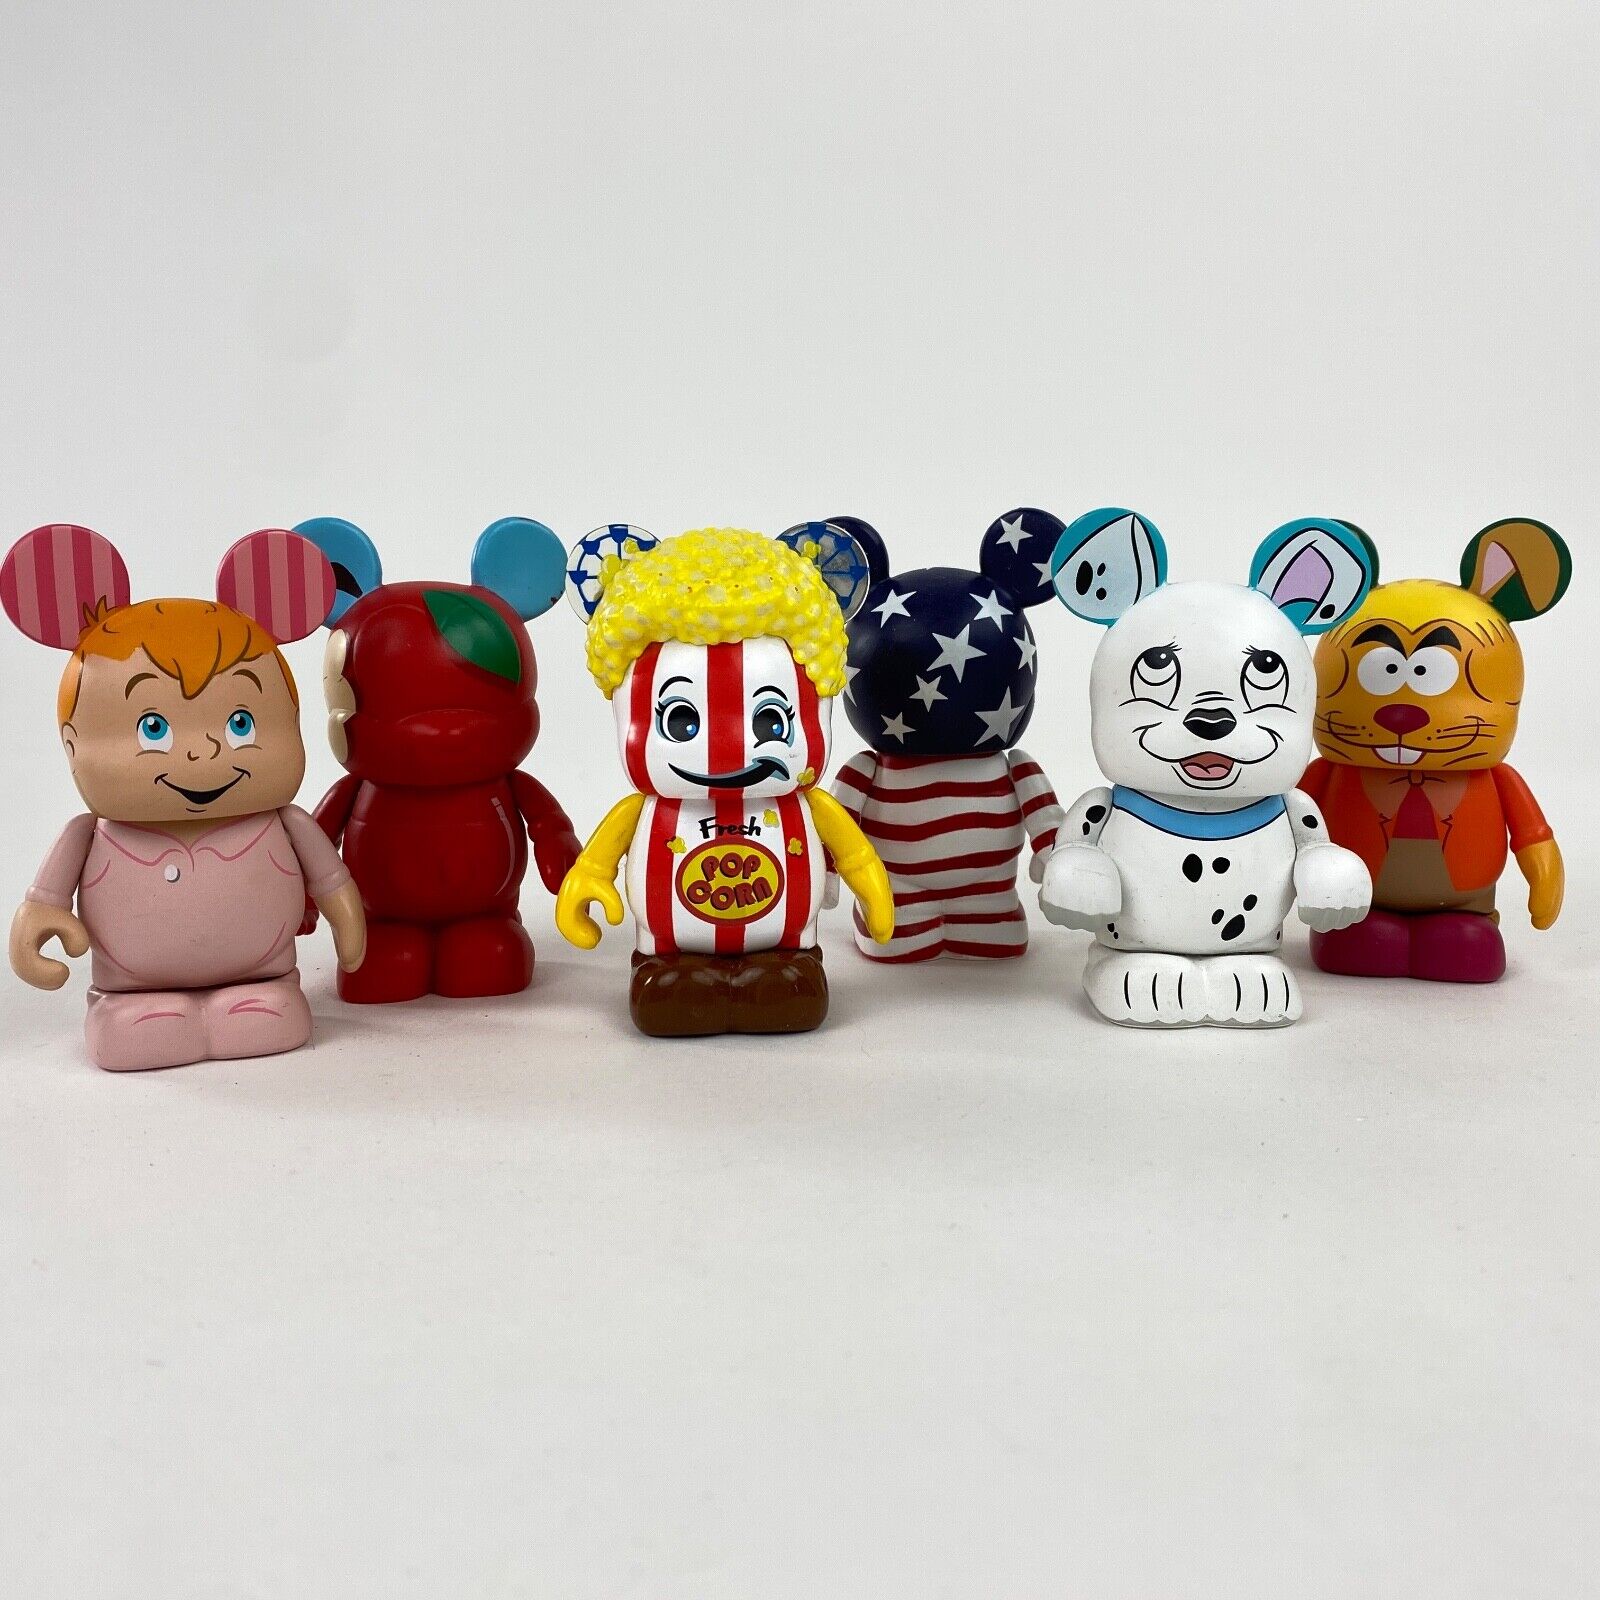 Lot of 6 Disney Vinylmation Figures Mixed Characters and Series Disney